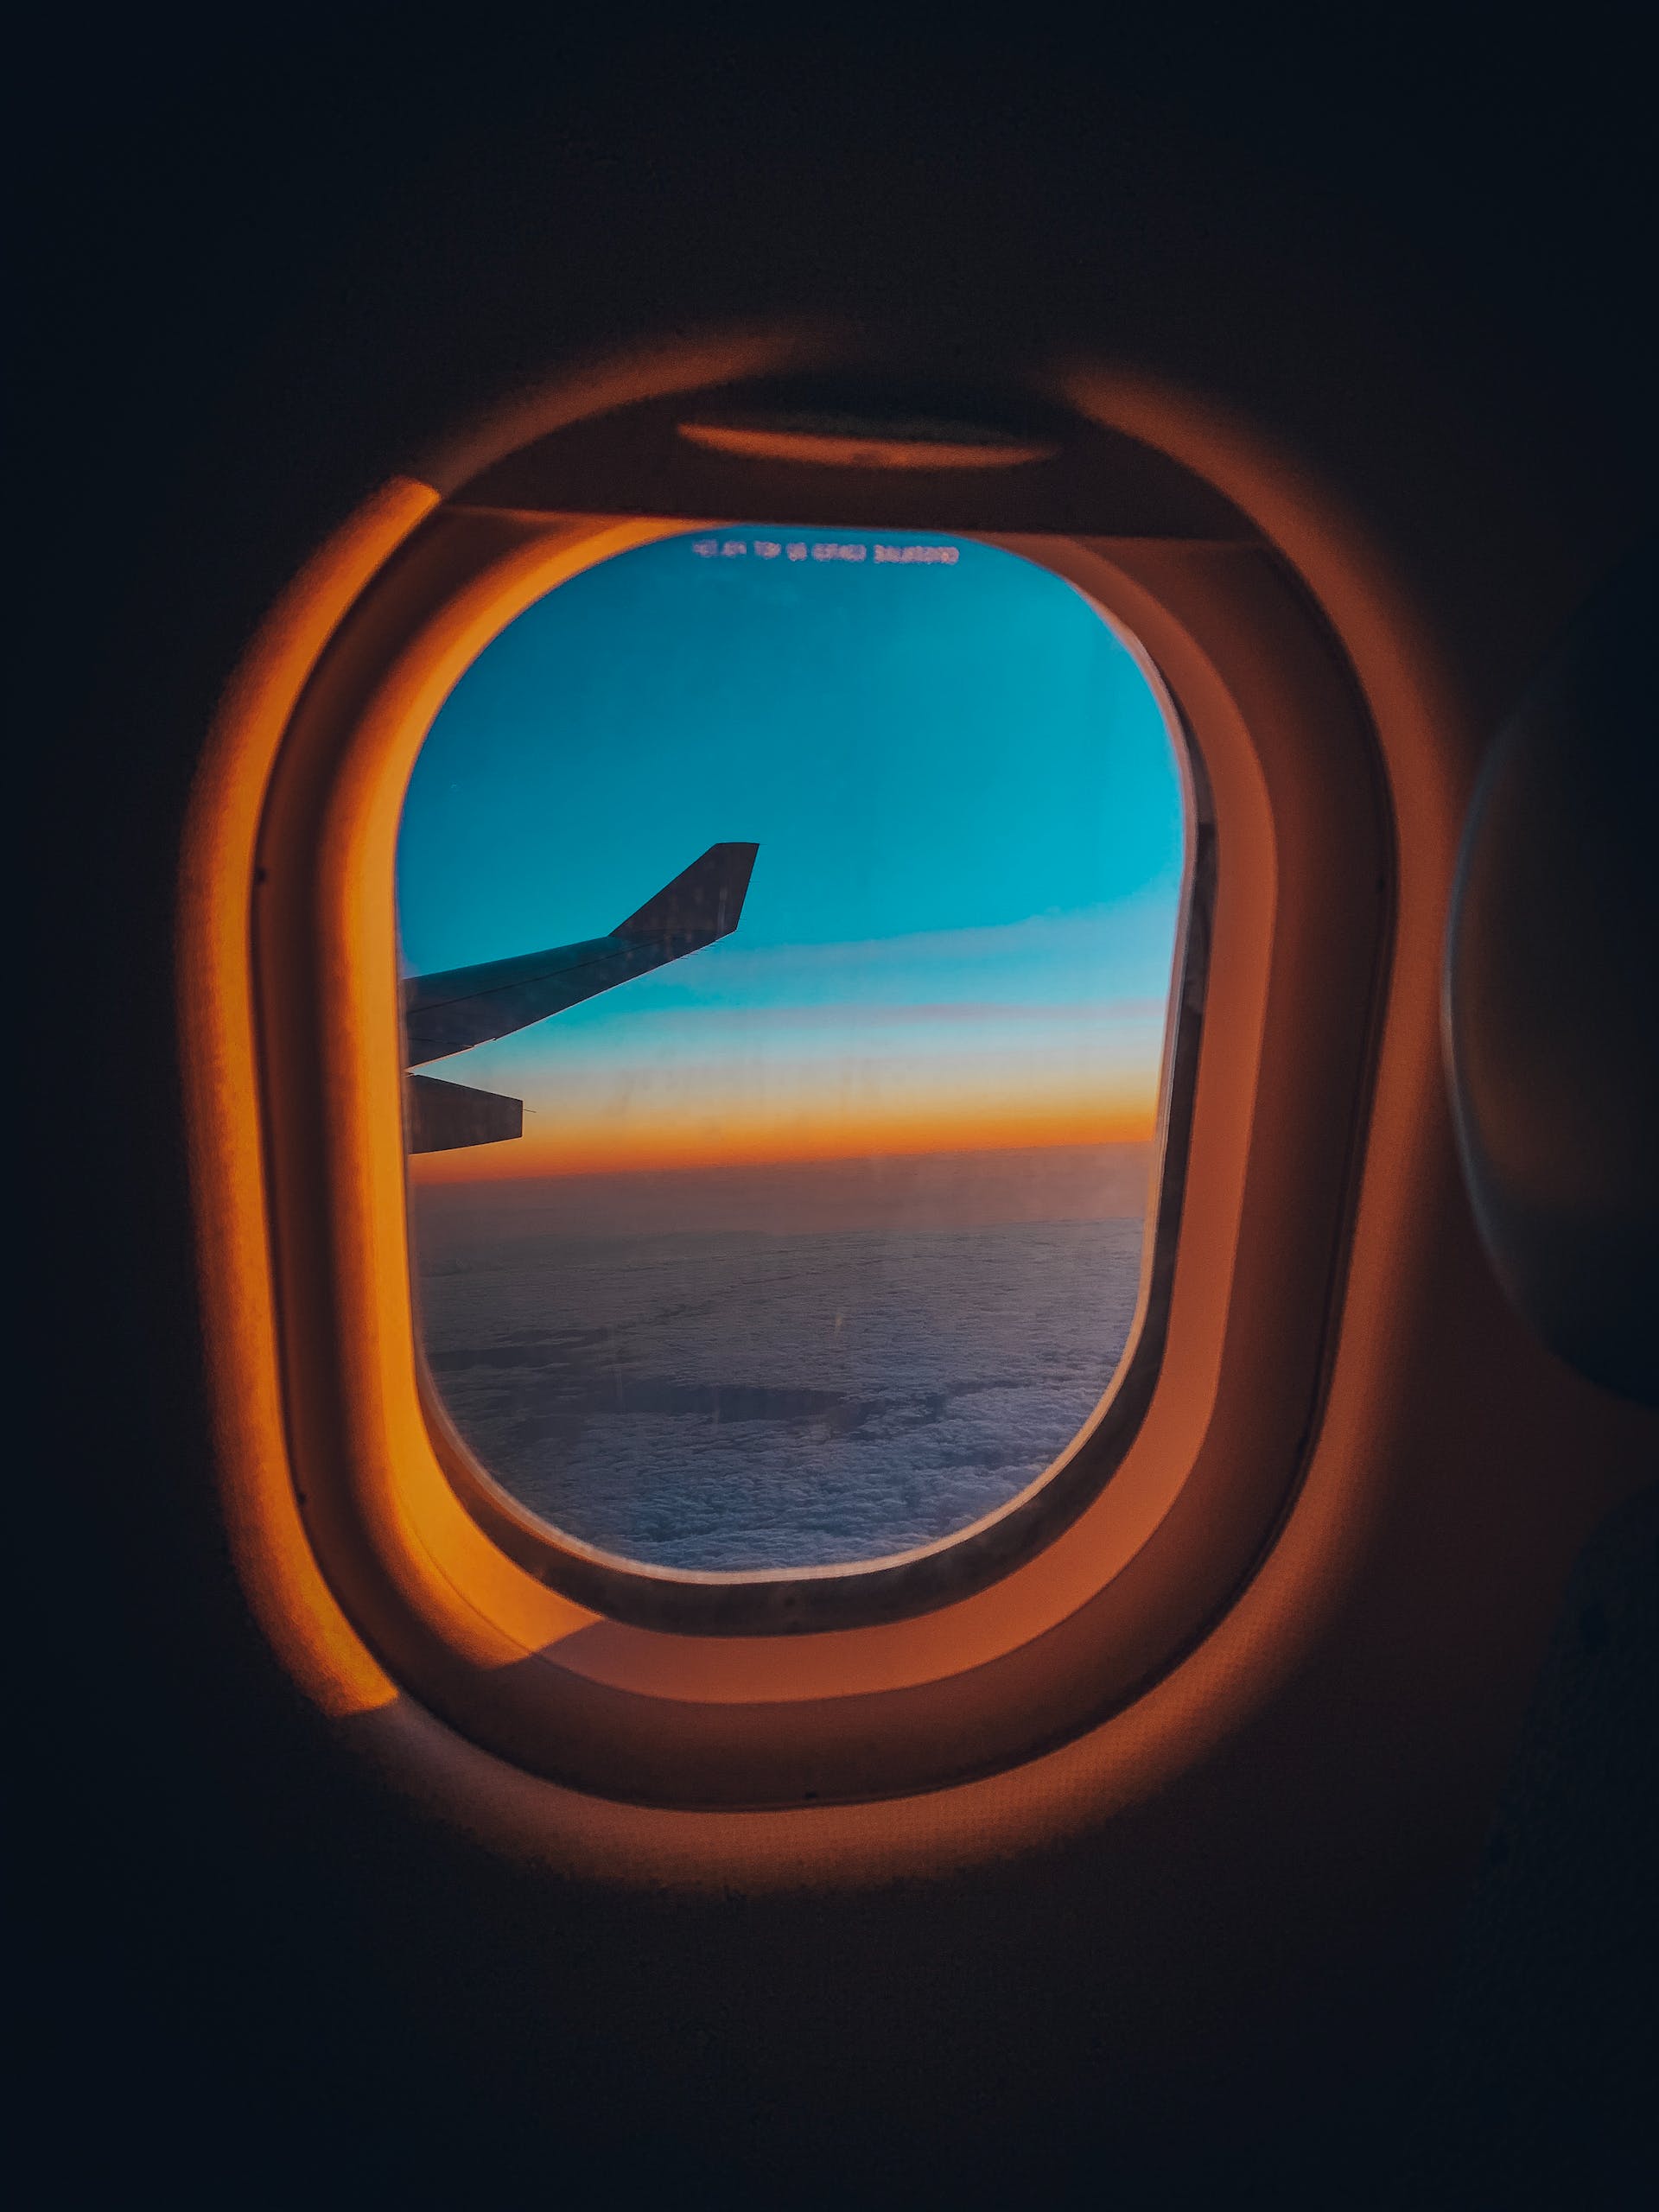 A photo of an airplane window | Source: Pexels